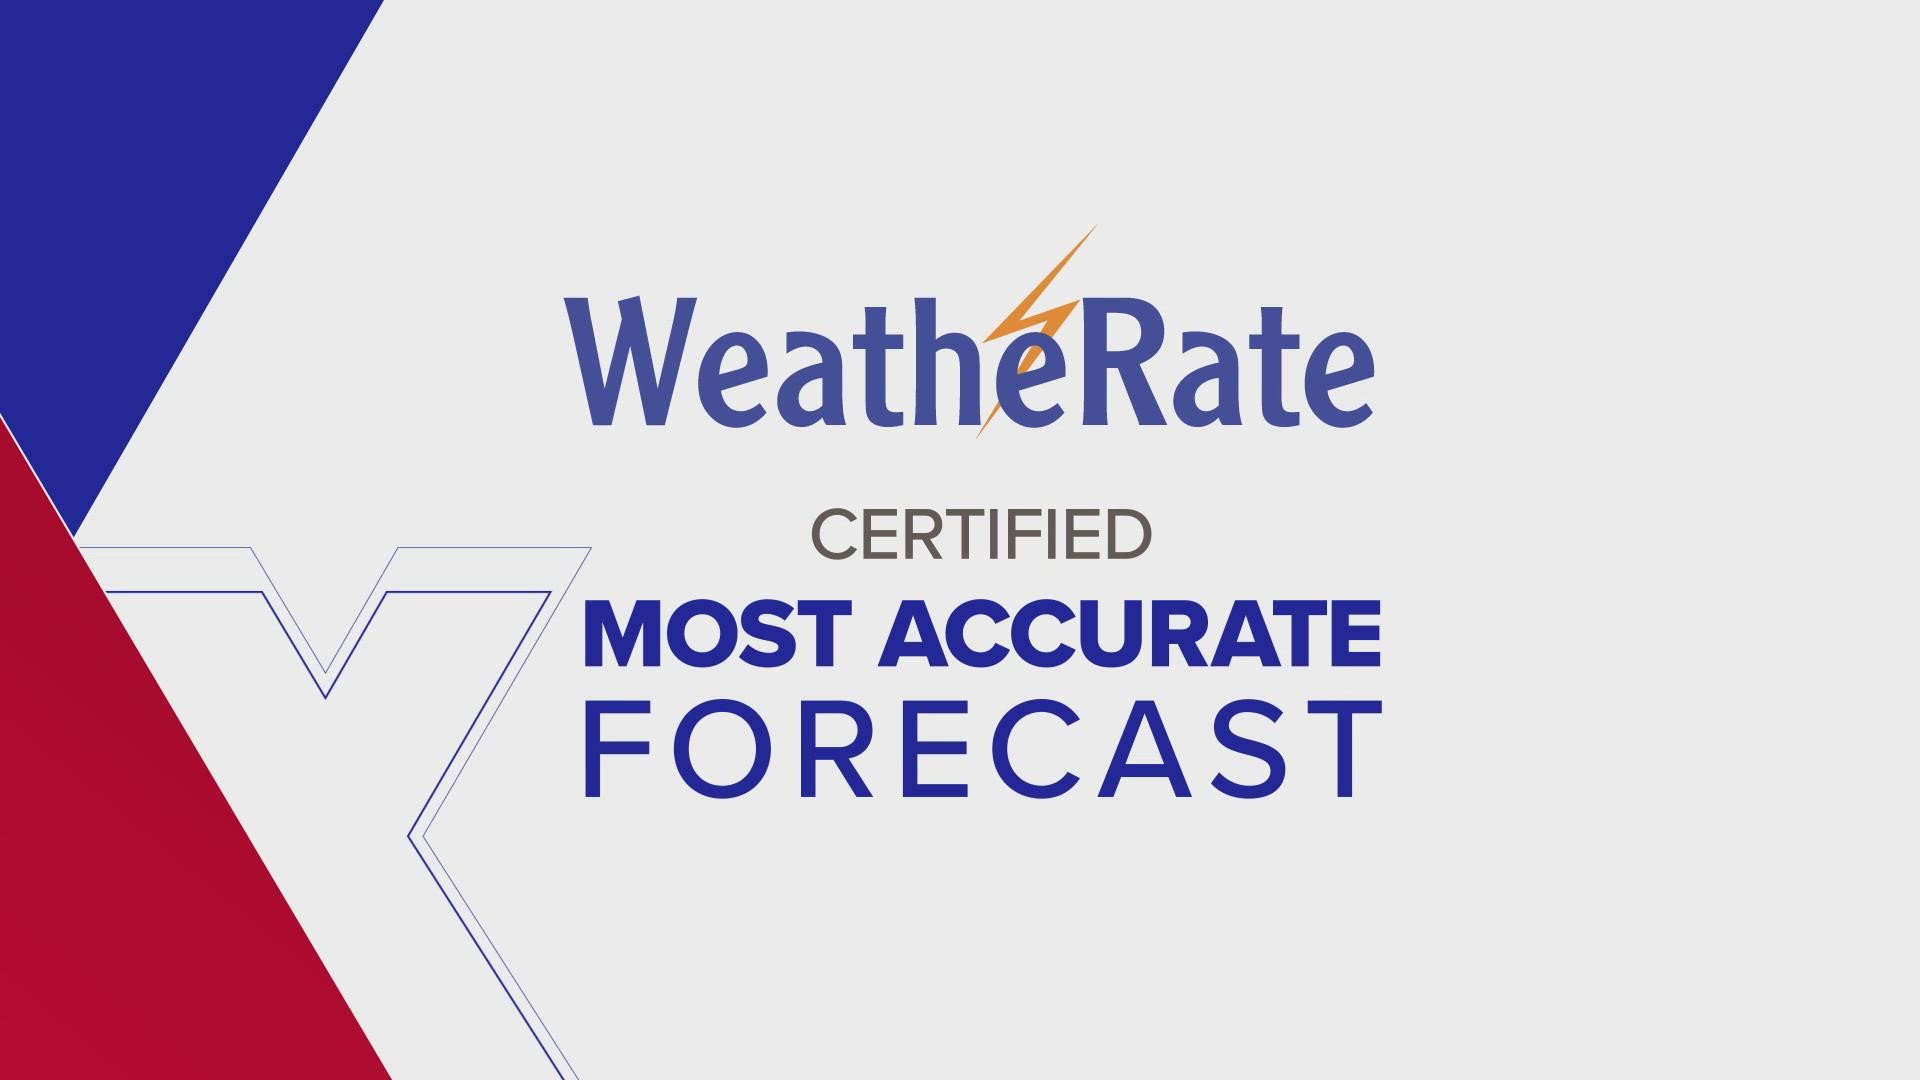 WeatheRate Certified Most Accurate Forecast